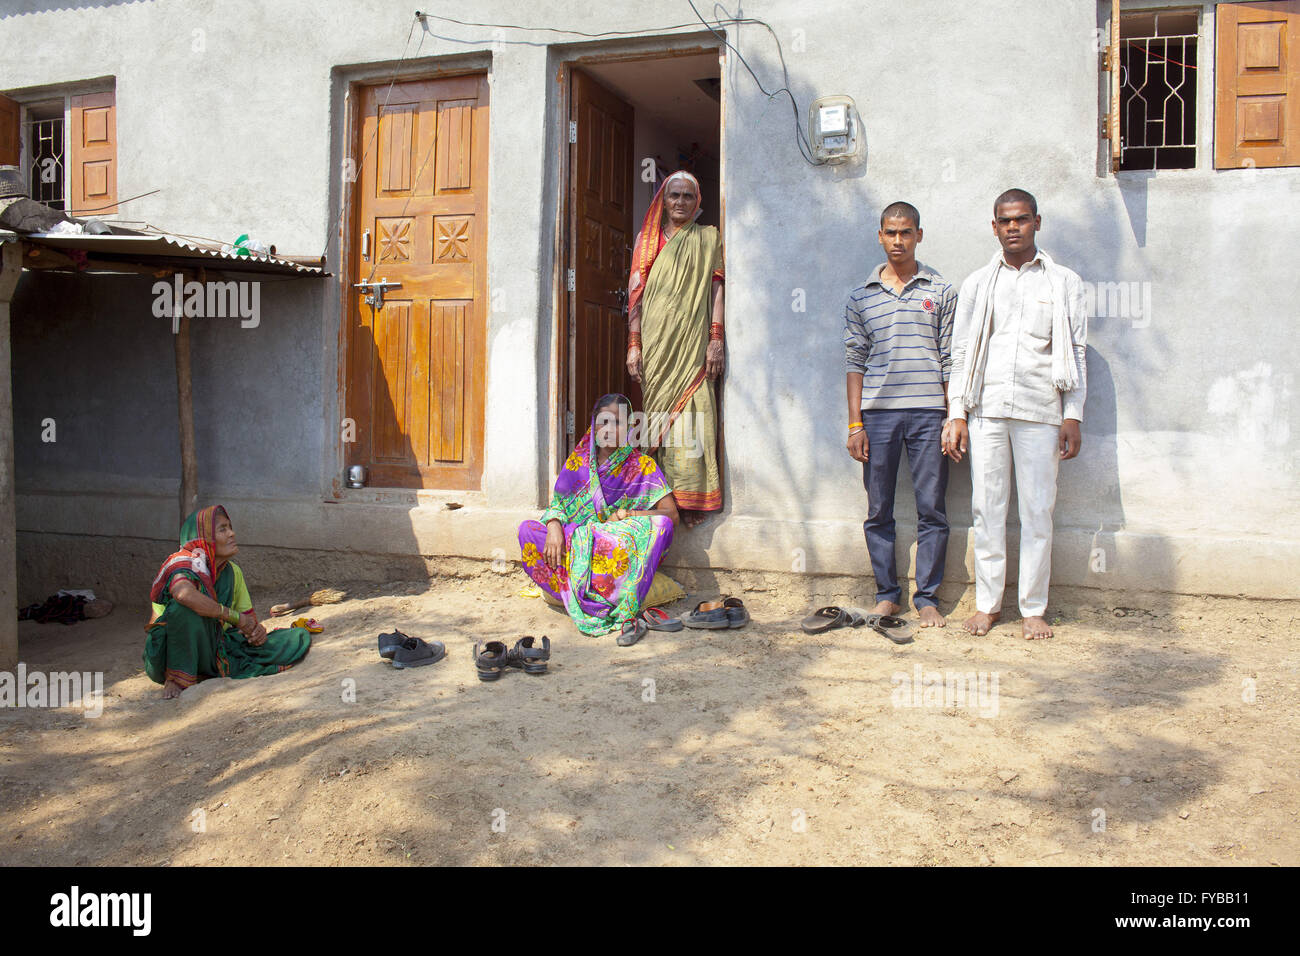 Latur, Maharashtra. 21st Apr, 2016. 21 April 2016 - Gategaon, Latur - INDIA.The family of Mahakant Mali, 55, who committed suicide by hanging himself from a dried Mango tree.Latur is part of the state's predominantly agricultural Marathwada region, where 273 farmers committed suicide between January and March this year.The area is among the worst affected by the drought and some families in Latur have left for cities such as the state capital Mumbai, nearly 500 kilometres away. In Latur town, there are huge queues at water storage tanks that are fed from dams. People wait in the searing Stock Photo